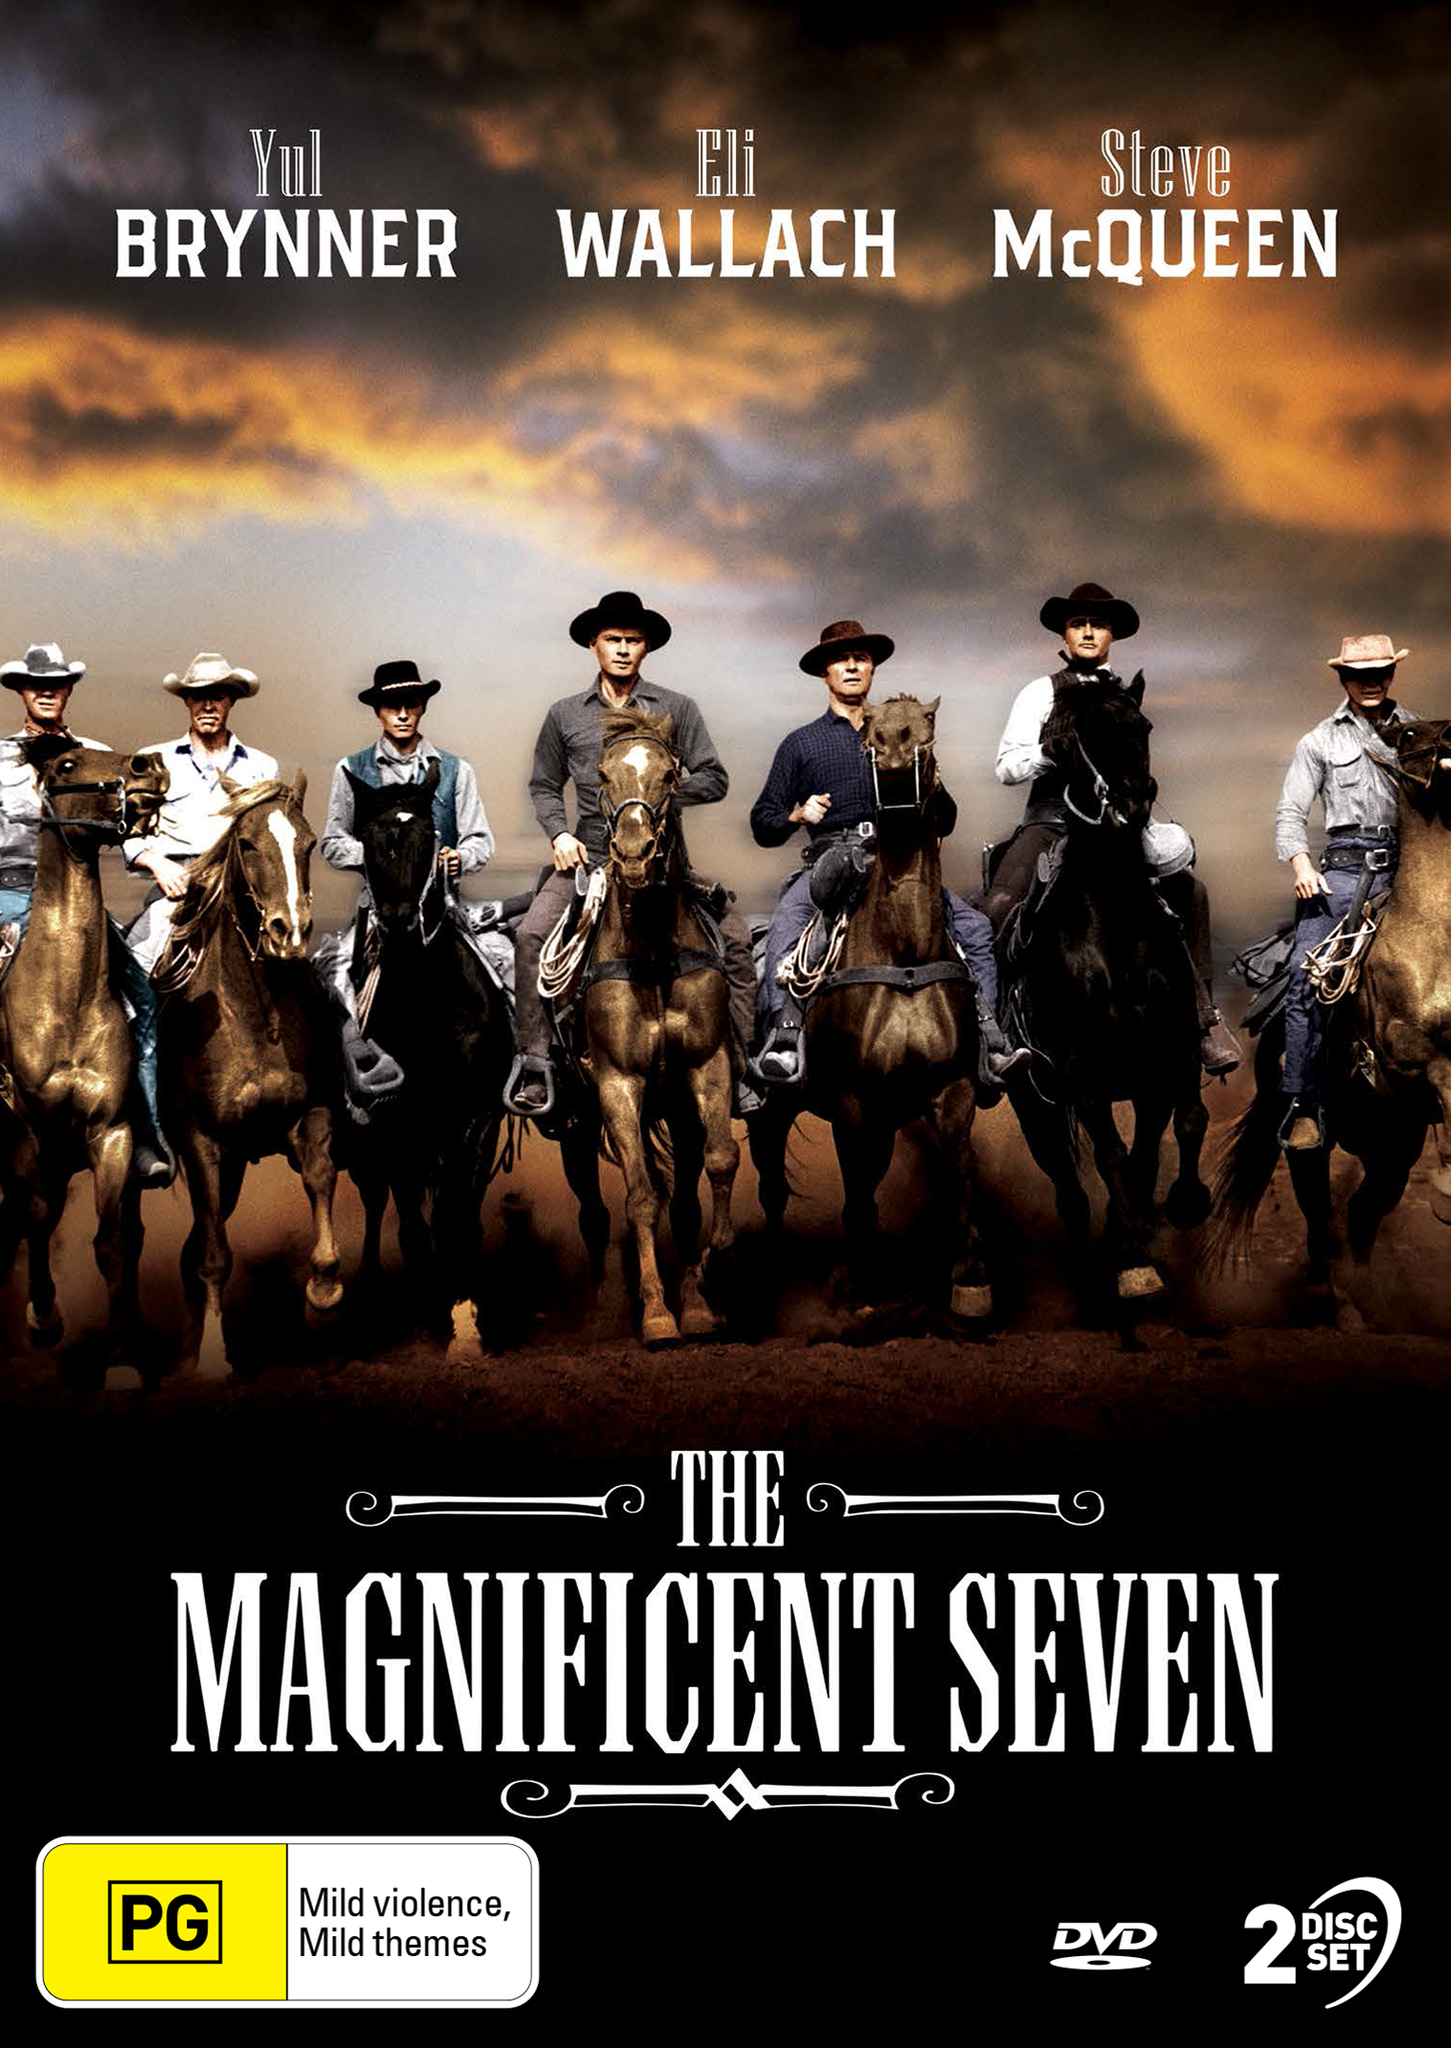 THE MAGNIFICENT SEVEN (1960) - DVD